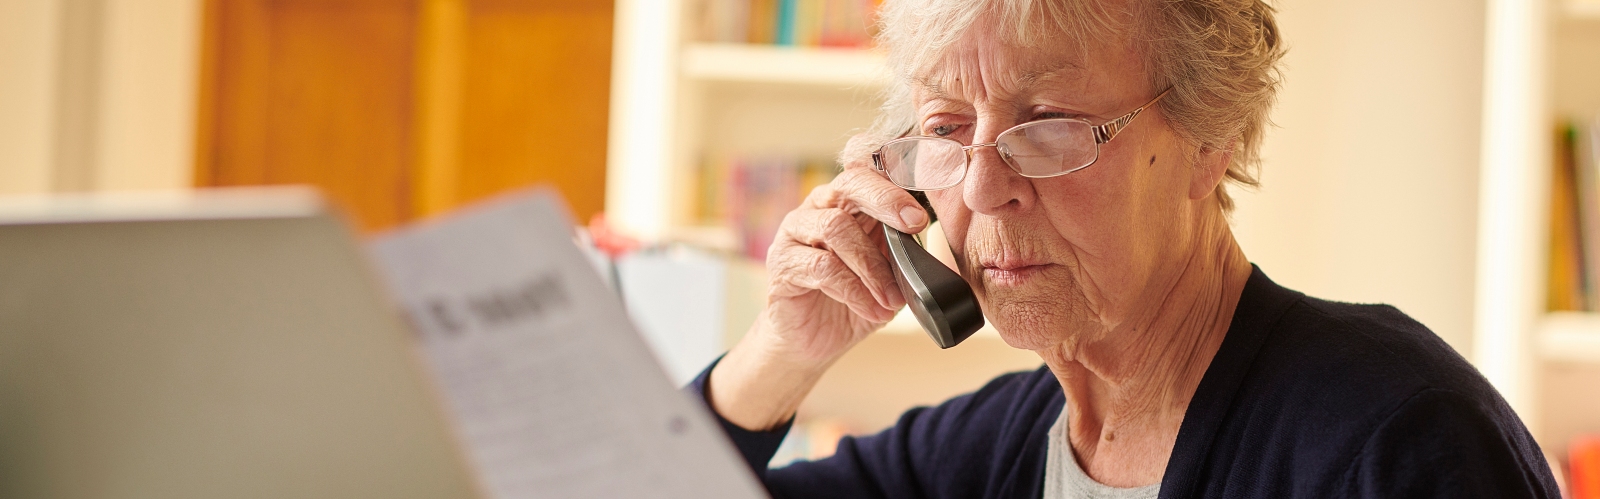 An older lady on the phone, looking concerned at her bill